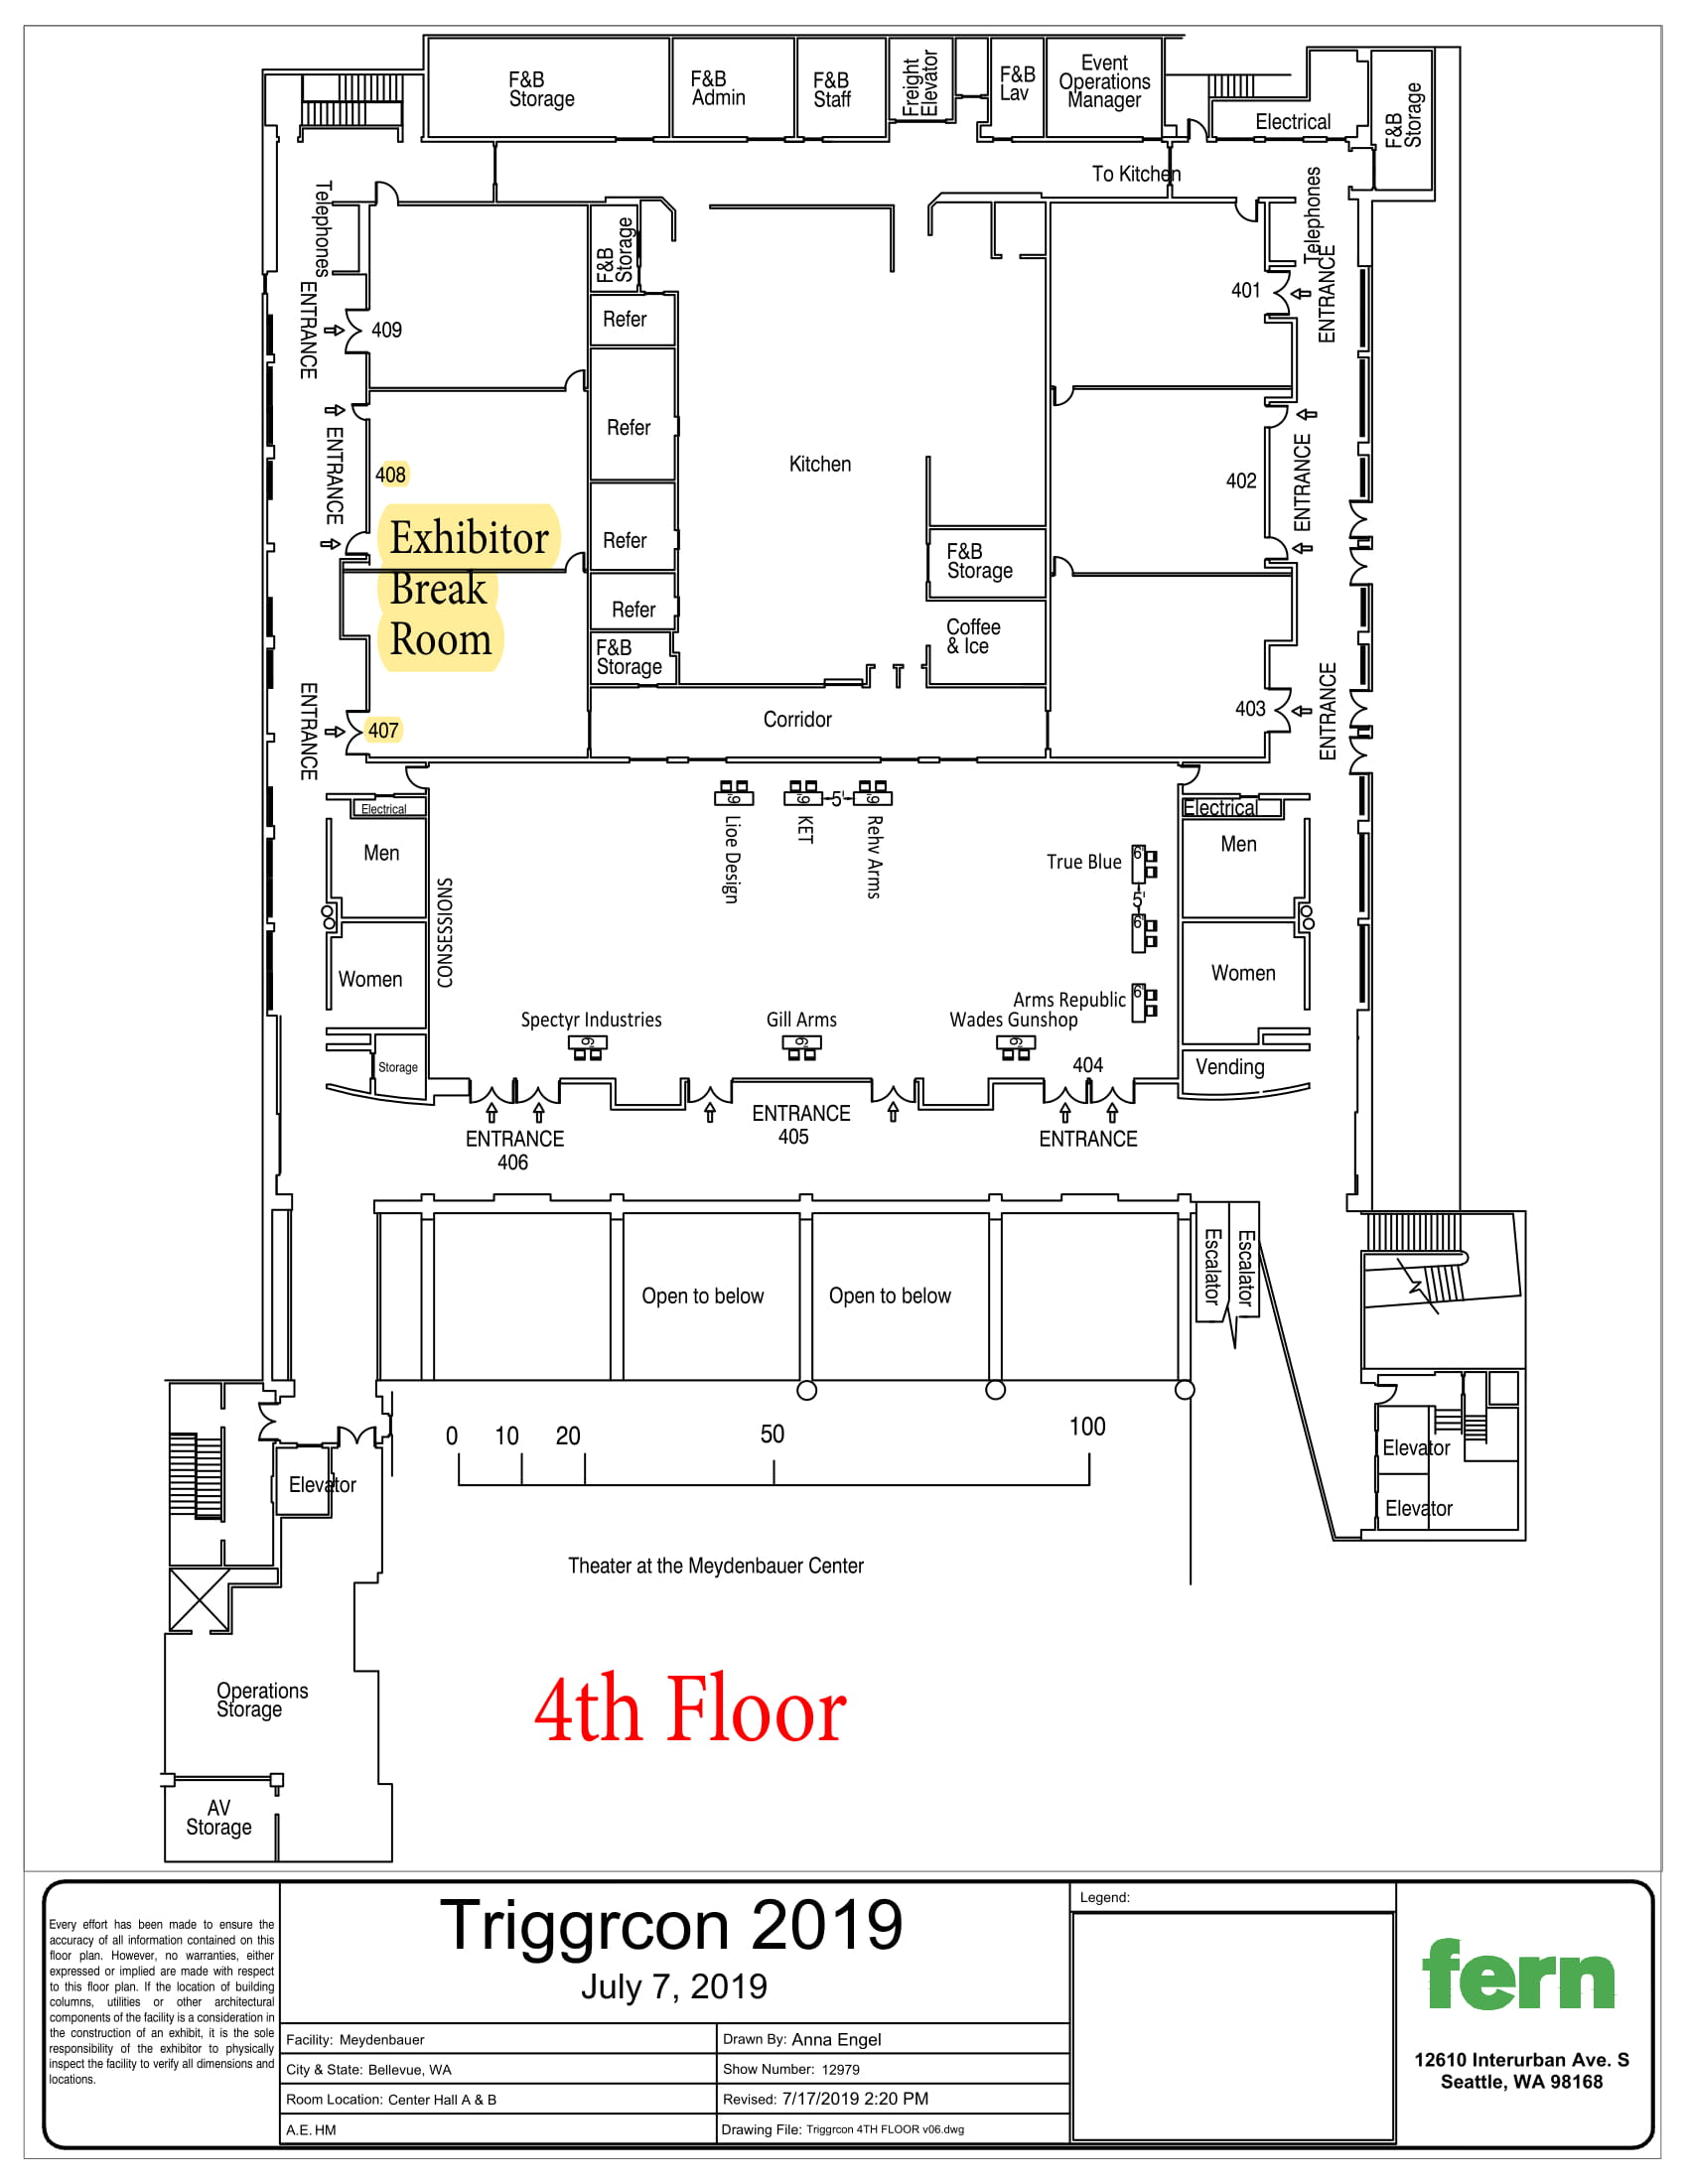 Triggrcon Booth Map